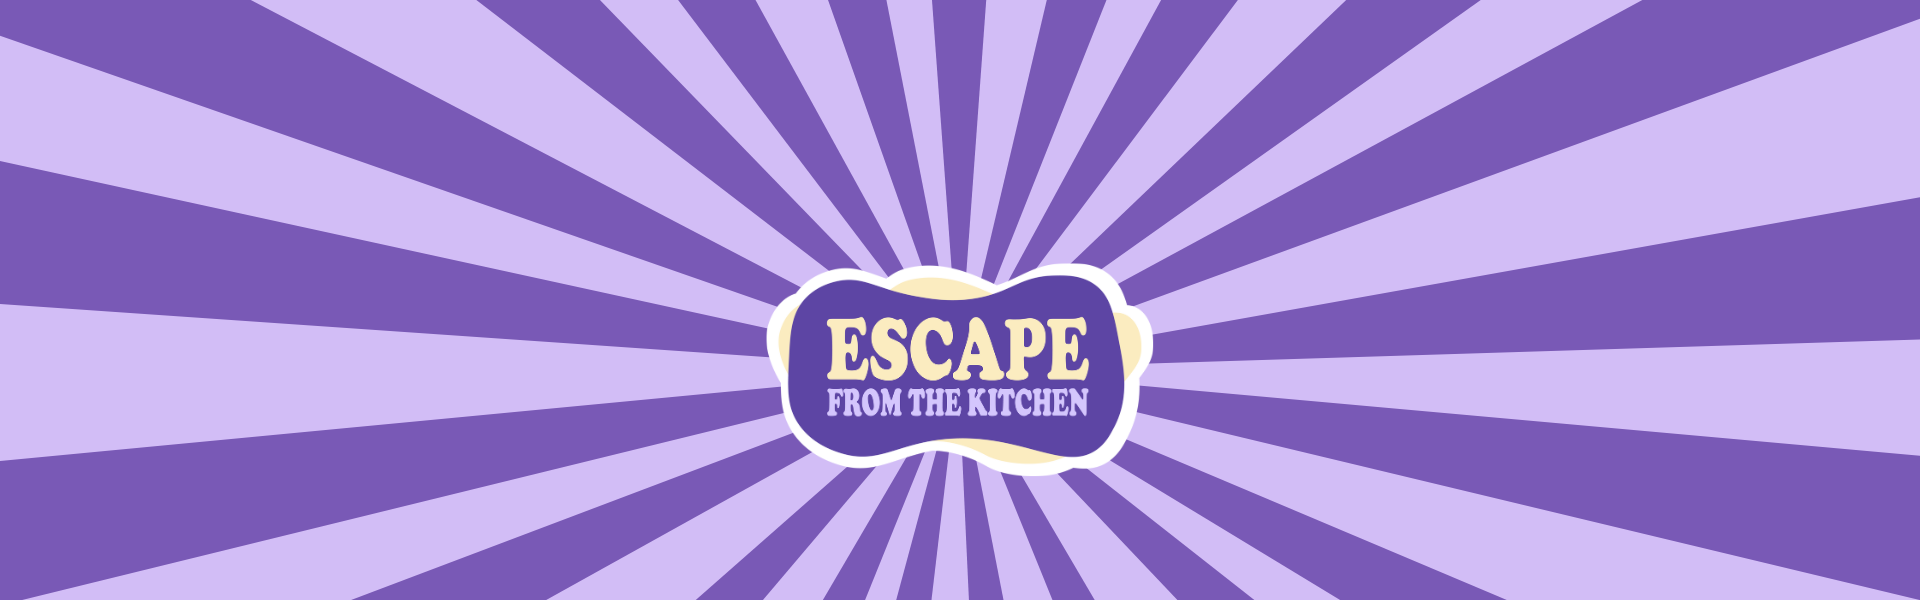 Escape From the Kitchen